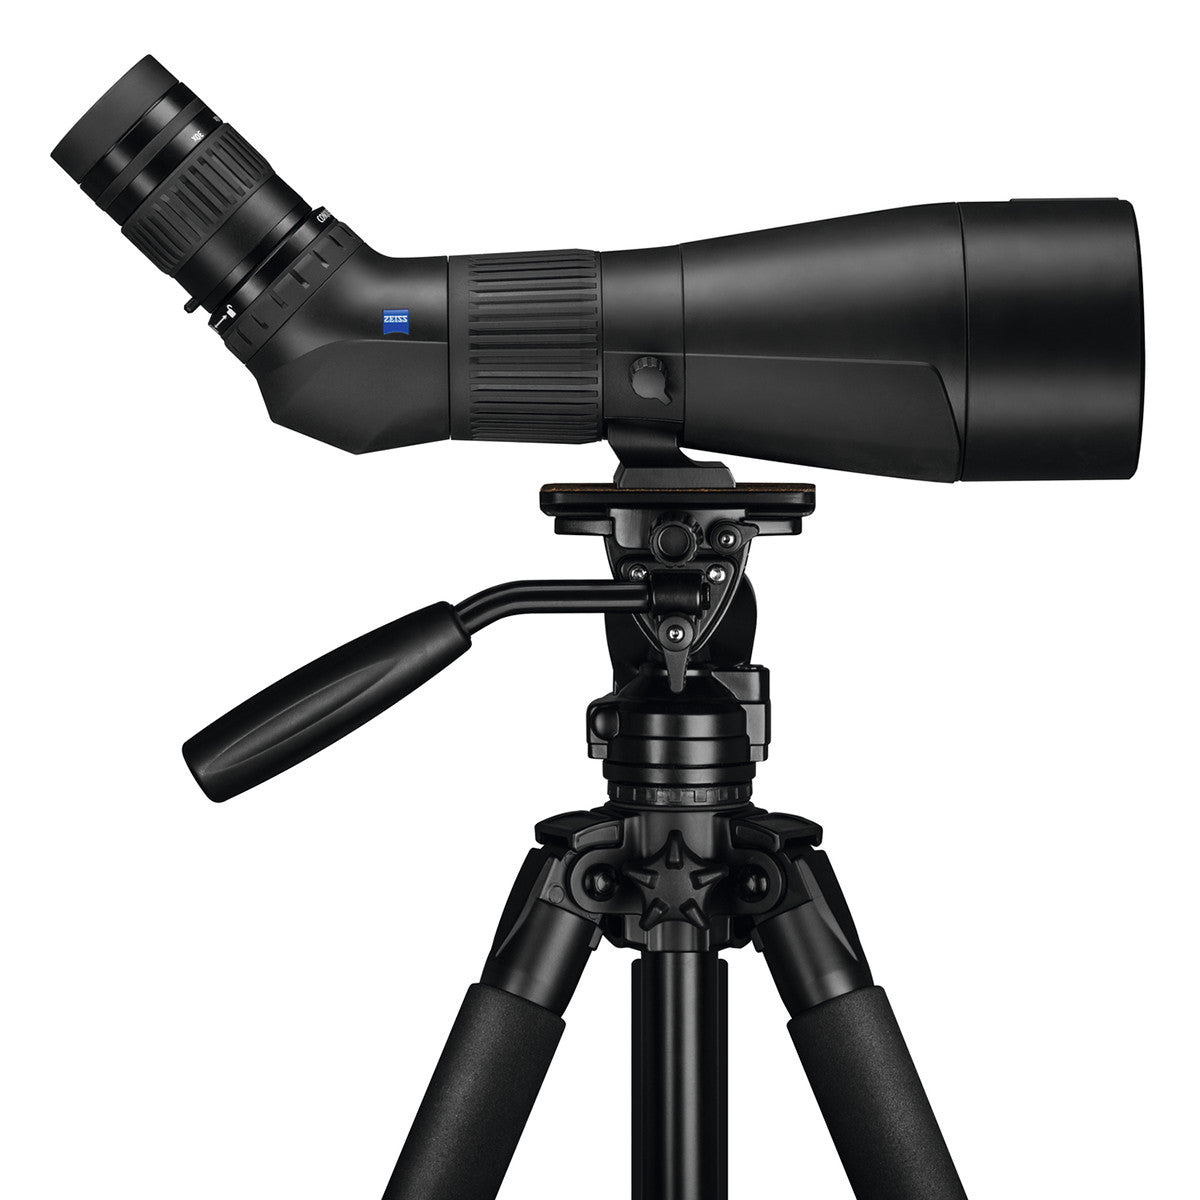 Zeiss Conquest Gavia 30-60x85 Angled Spotting Scope in Zeiss Conquest Gavia 30-60x85 Angled Spotting Scope - goHUNT Shop by GOHUNT | Zeiss - GOHUNT Shop